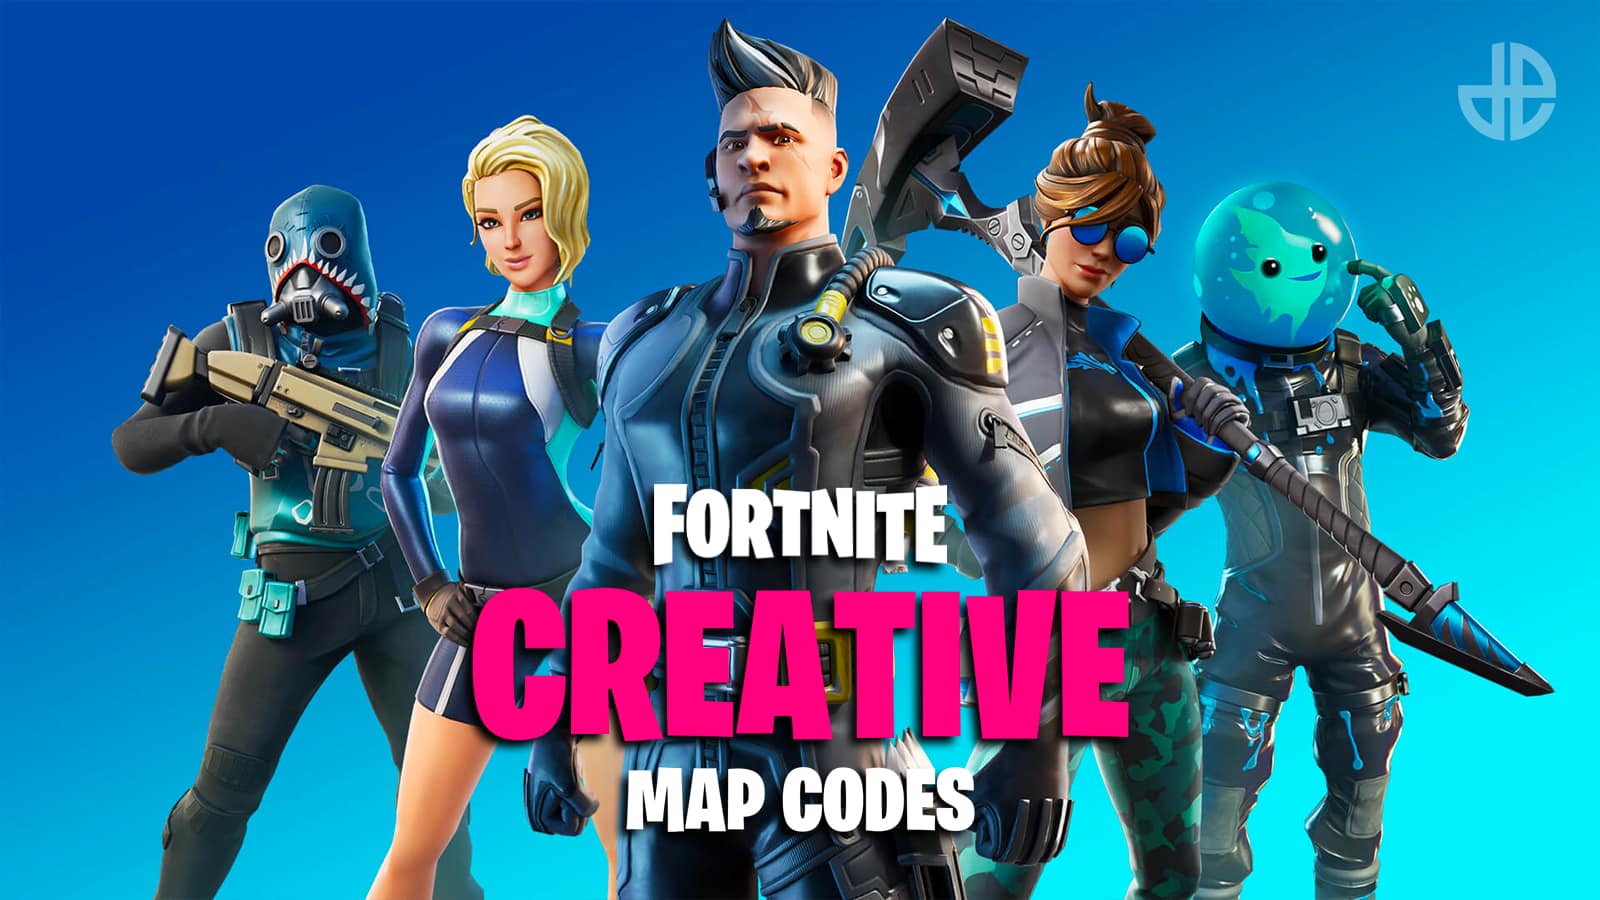 Hottest Racing Map Codes in Fortnite Creative